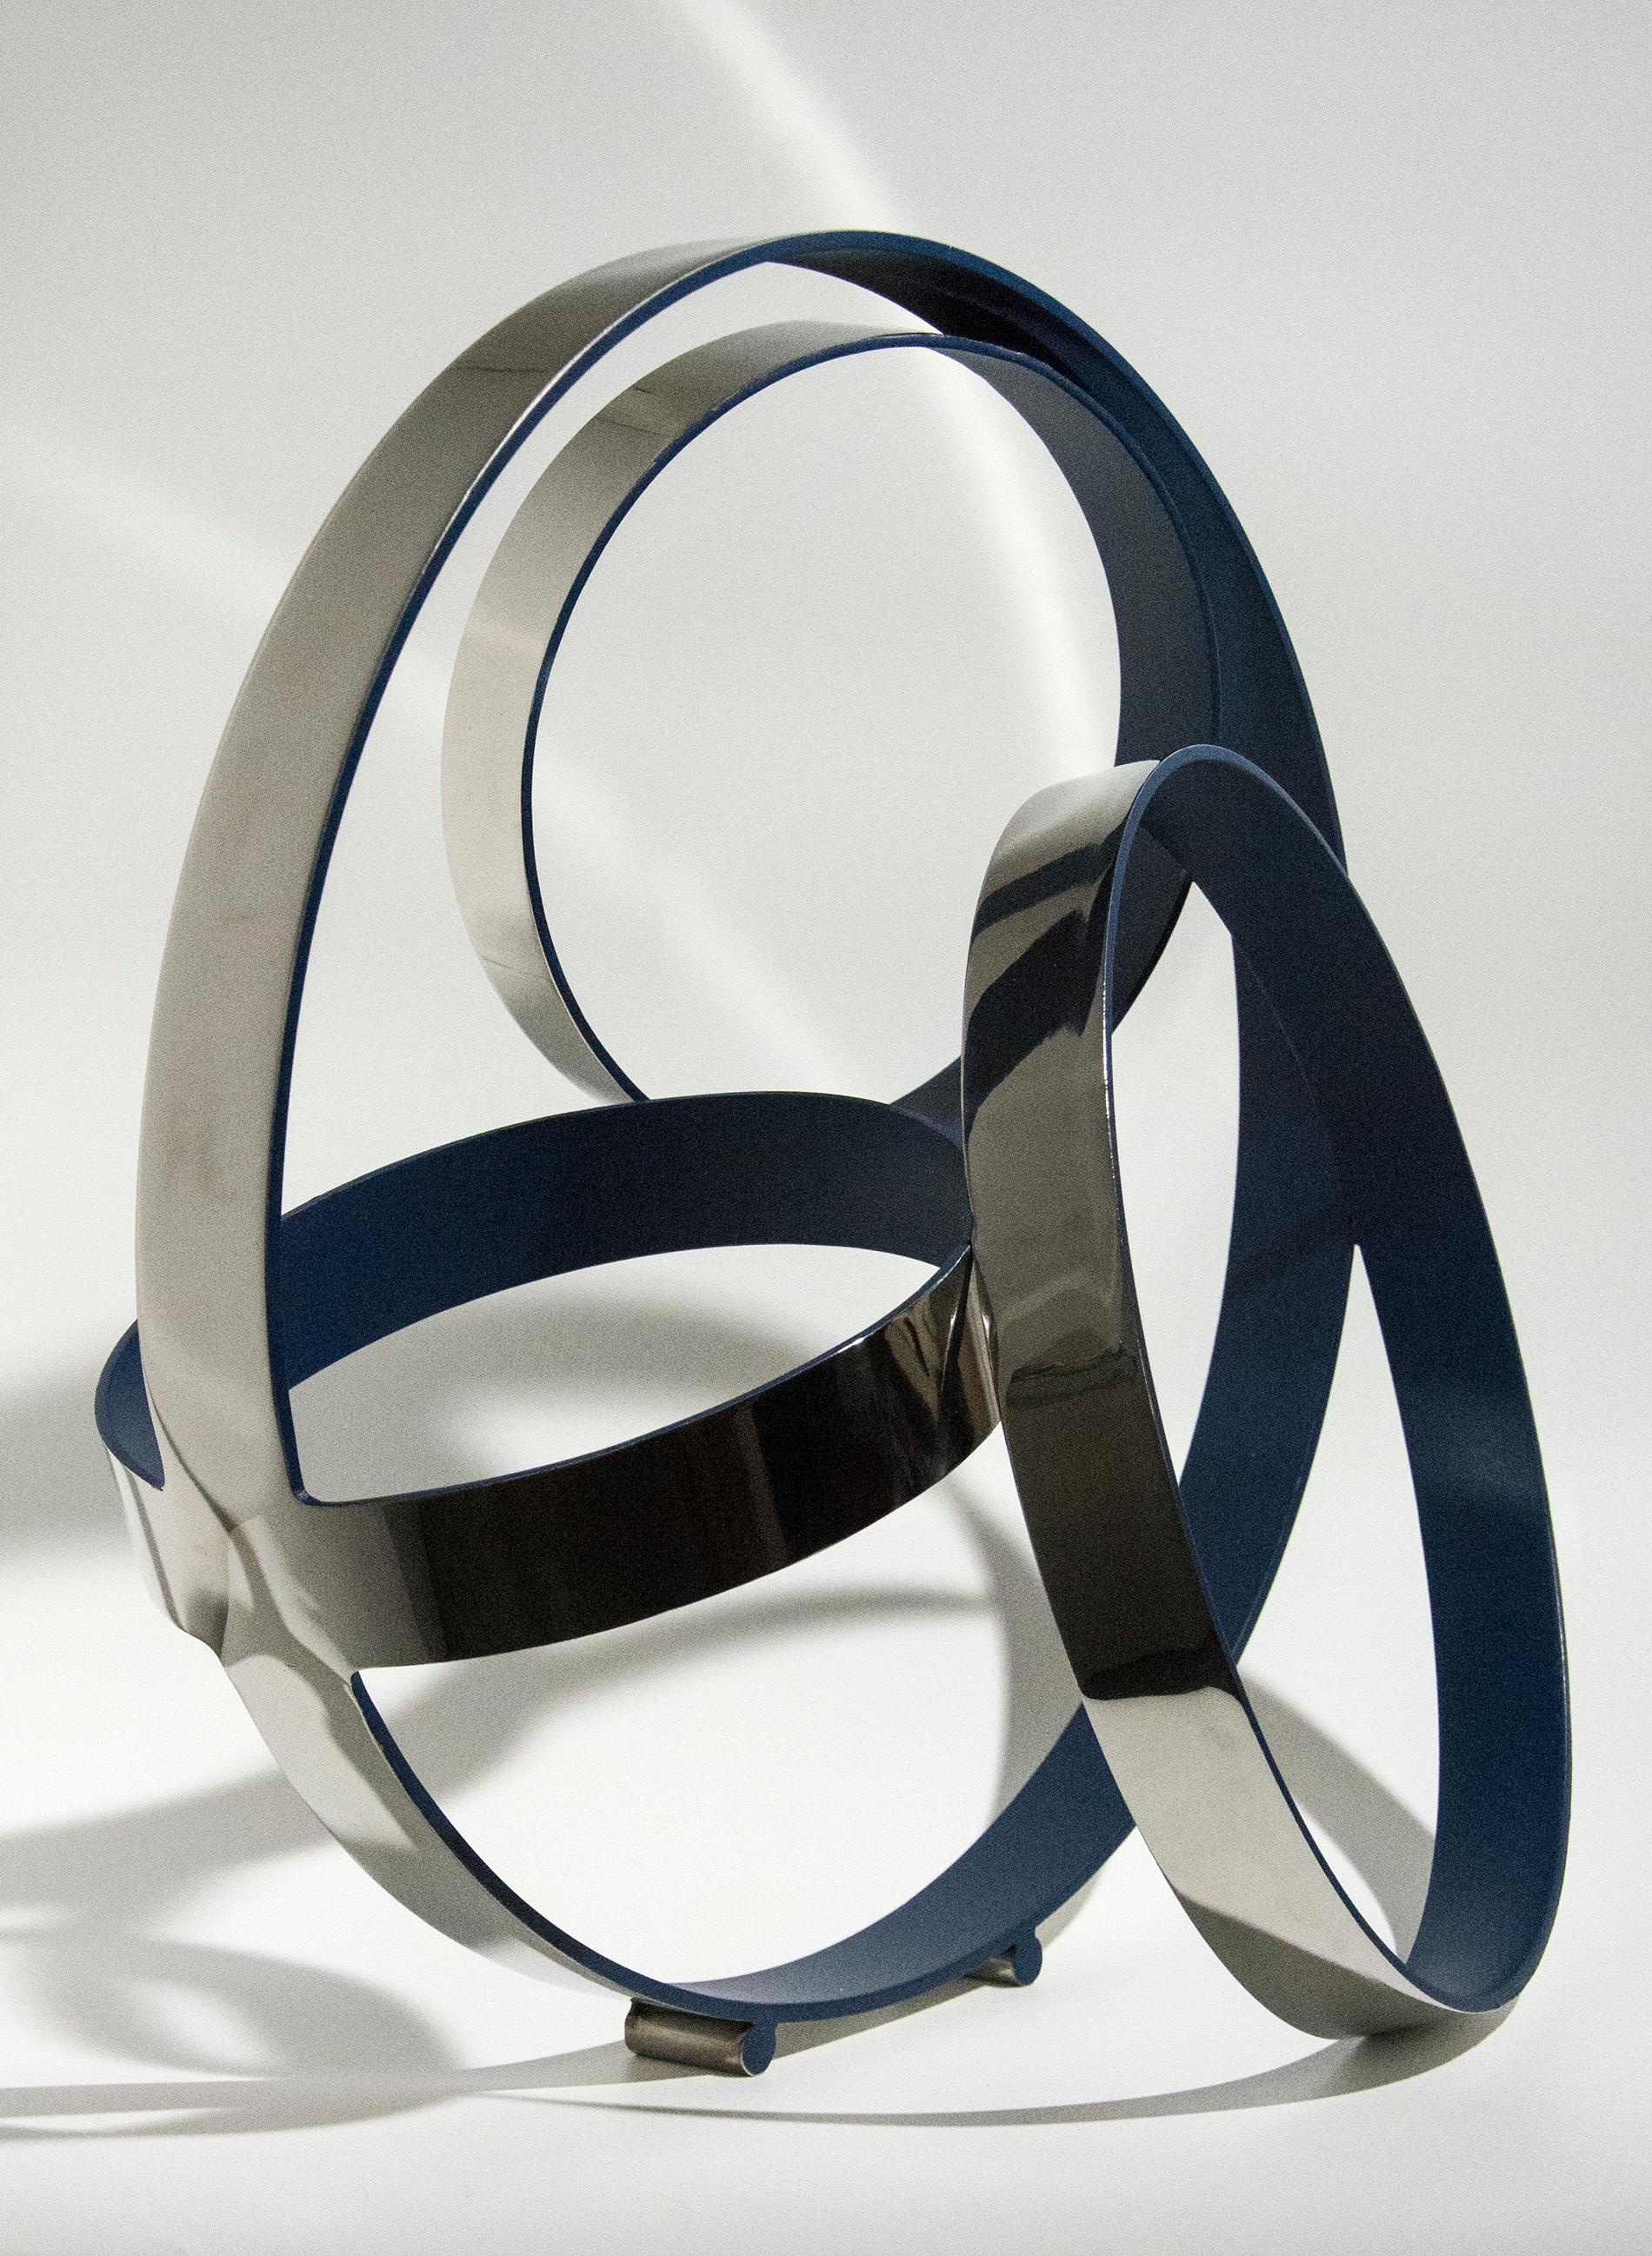 Four Ring Temps Zero Ultra Marine Blue - Sculpture by Philippe Pallafray